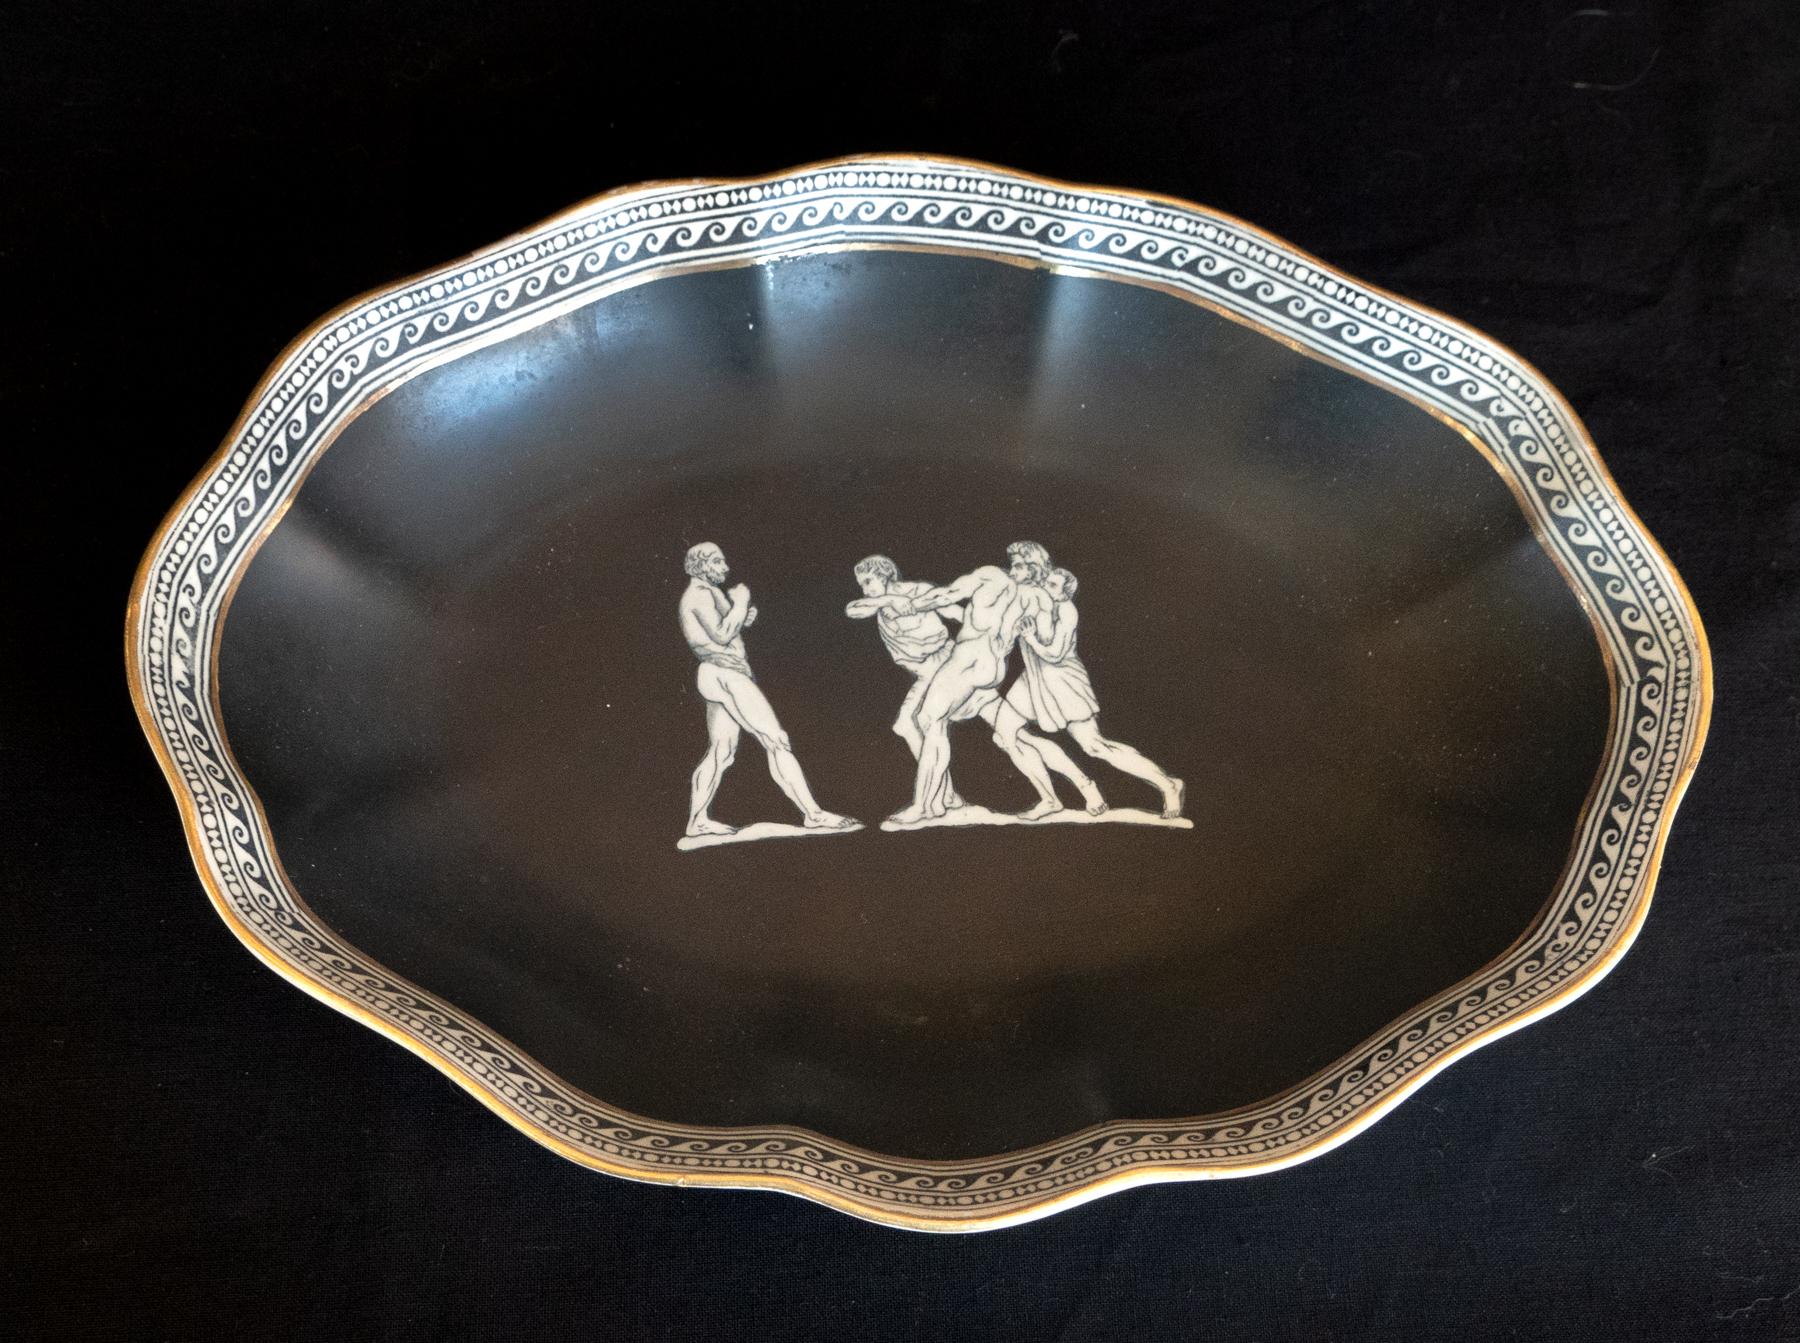 Early 20th C. English Foilate Oval Form Plate with Classic Greco Roman Wrestlers In Good Condition For Sale In San Francisco, CA